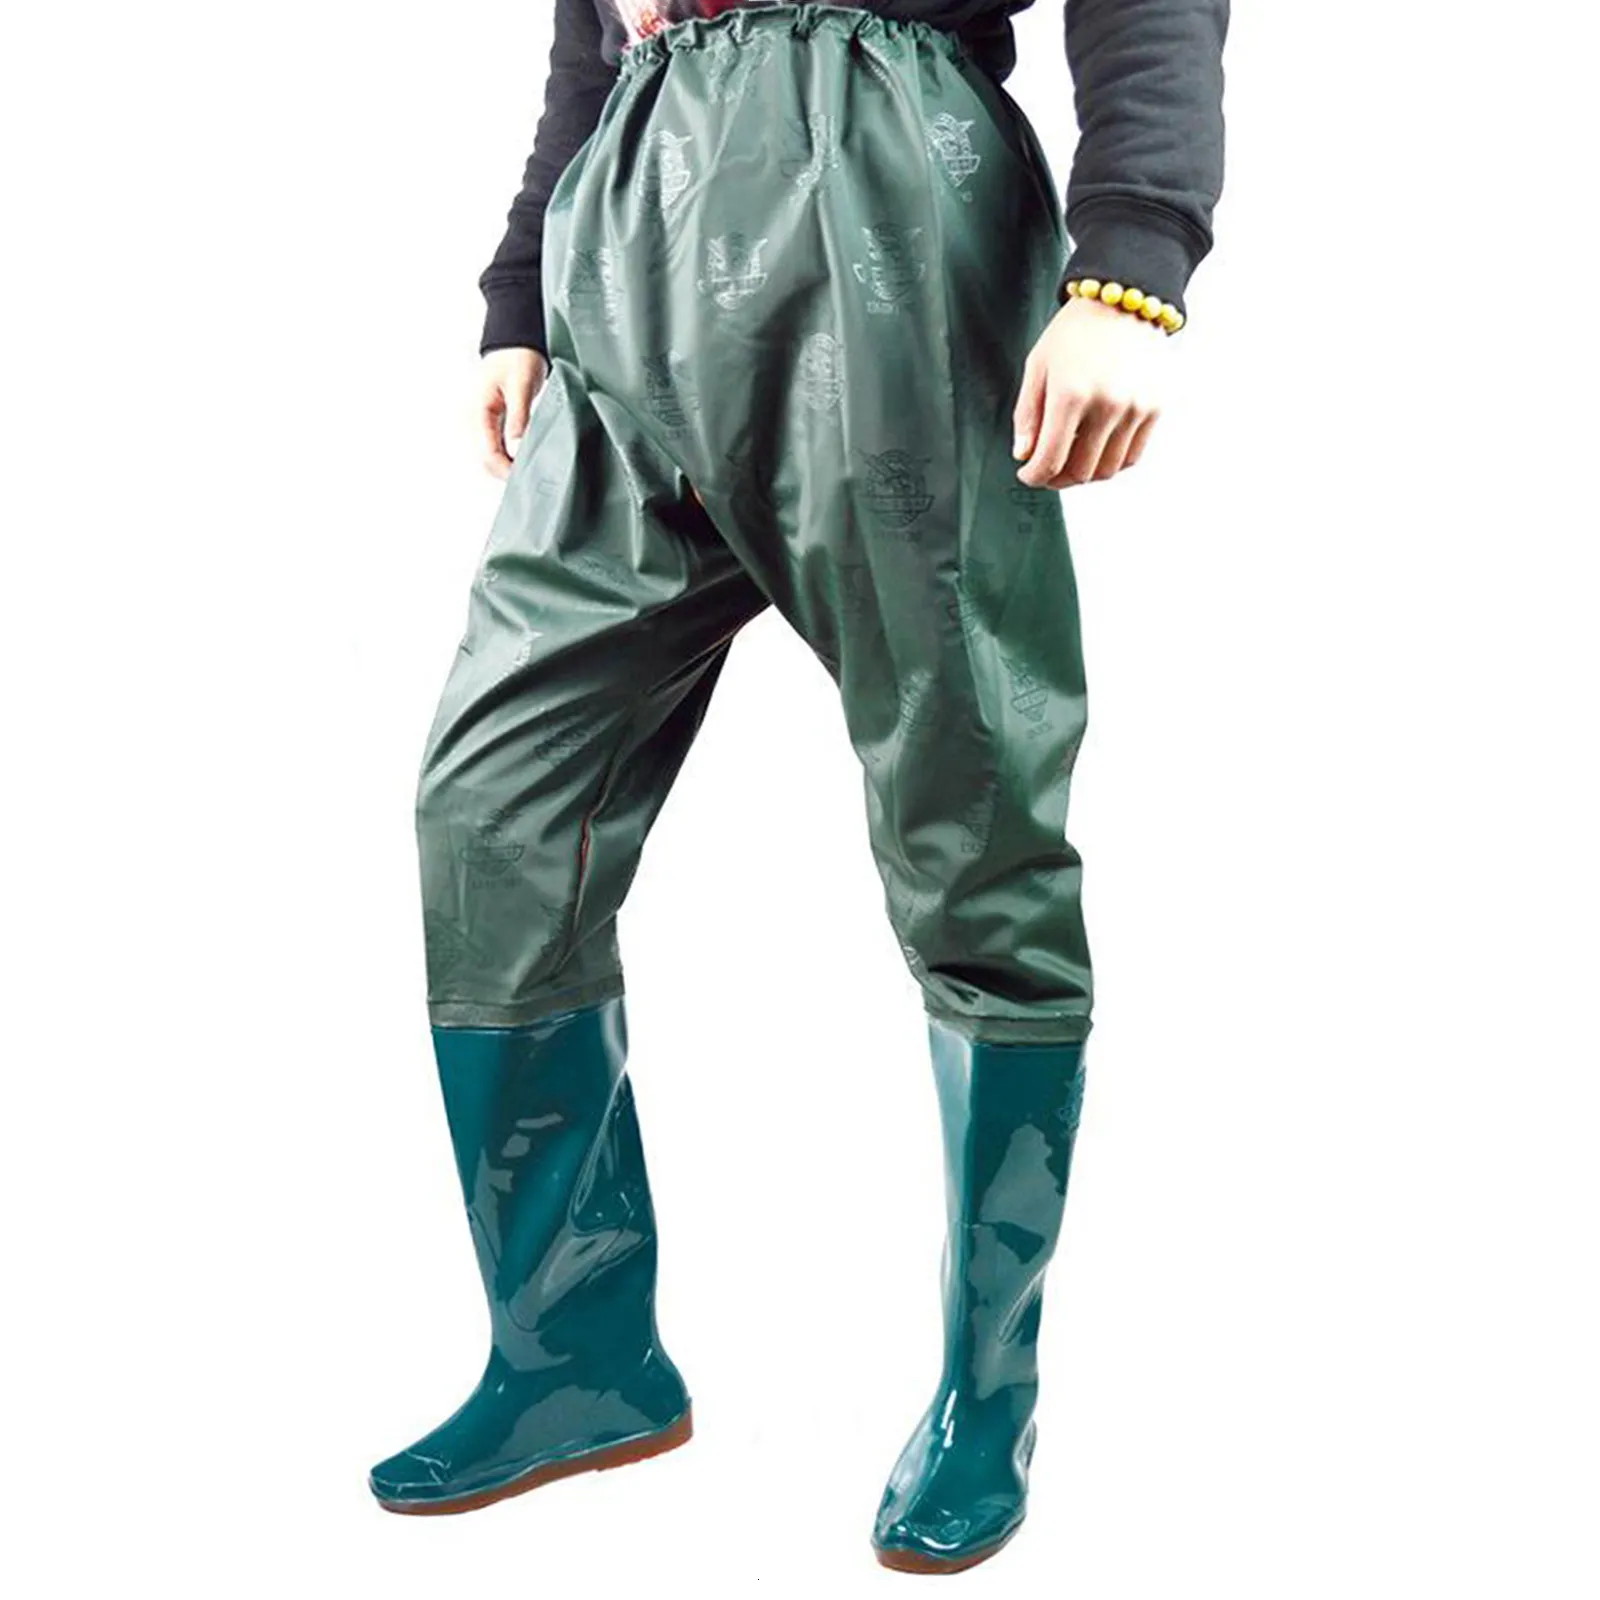 Waterproof Waist Fishing Wader Pants For Outdoor Activities Green Fisherman  Shoes For Wading And Ground Fishing Style #230520 From Bai07, $28.35